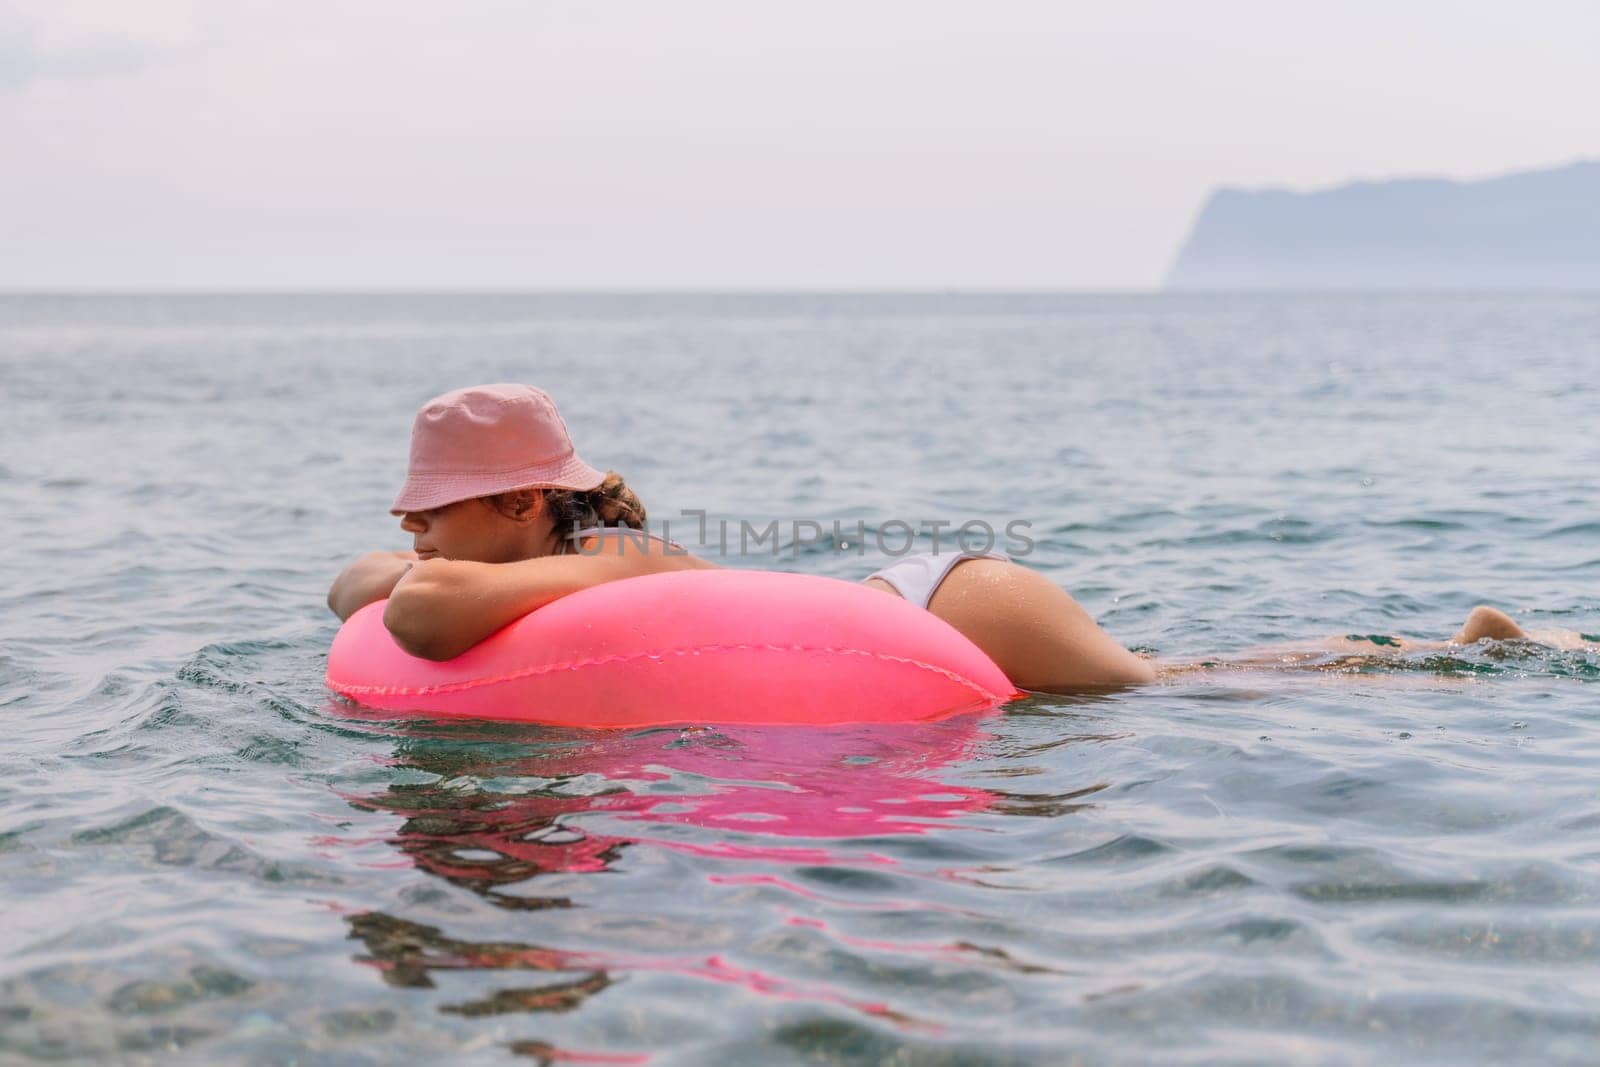 A woman is floating on a pink inflatable raft in the ocean. The water is calm and the sky is cloudy. The woman is wearing a white bikini and a pink hat